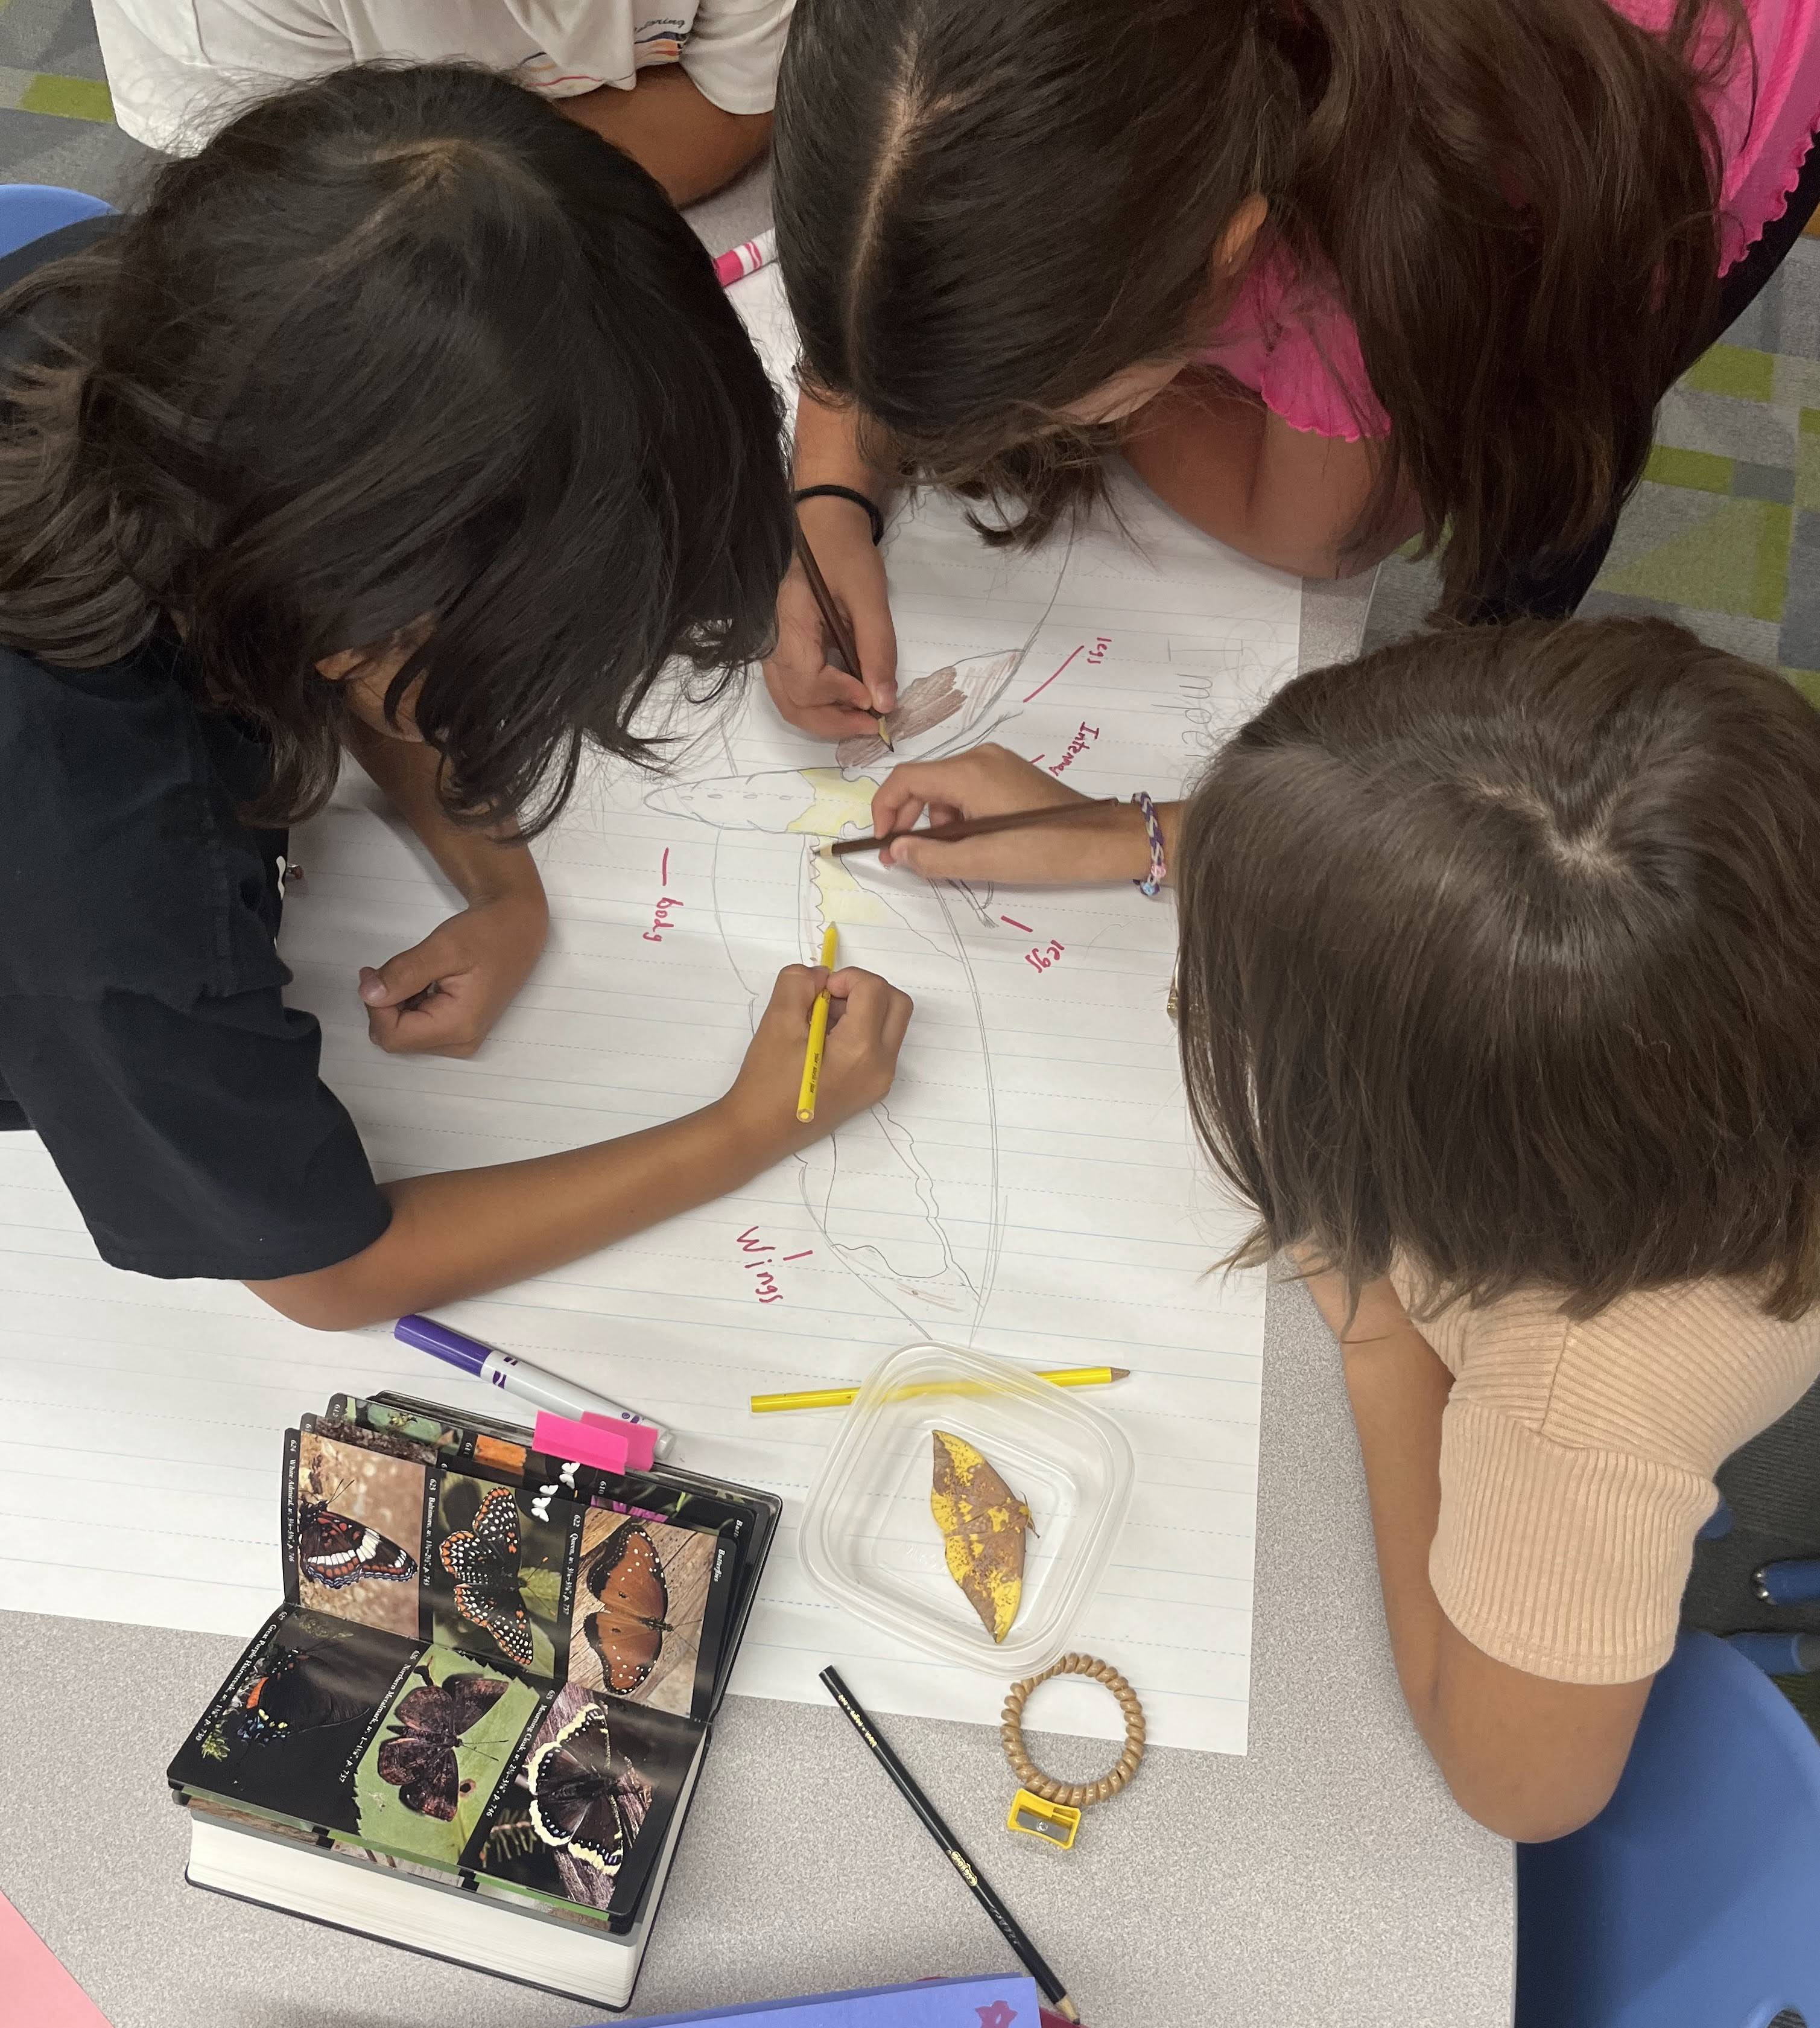 Students reference an open field guide to draw an imperial moth on a poster.